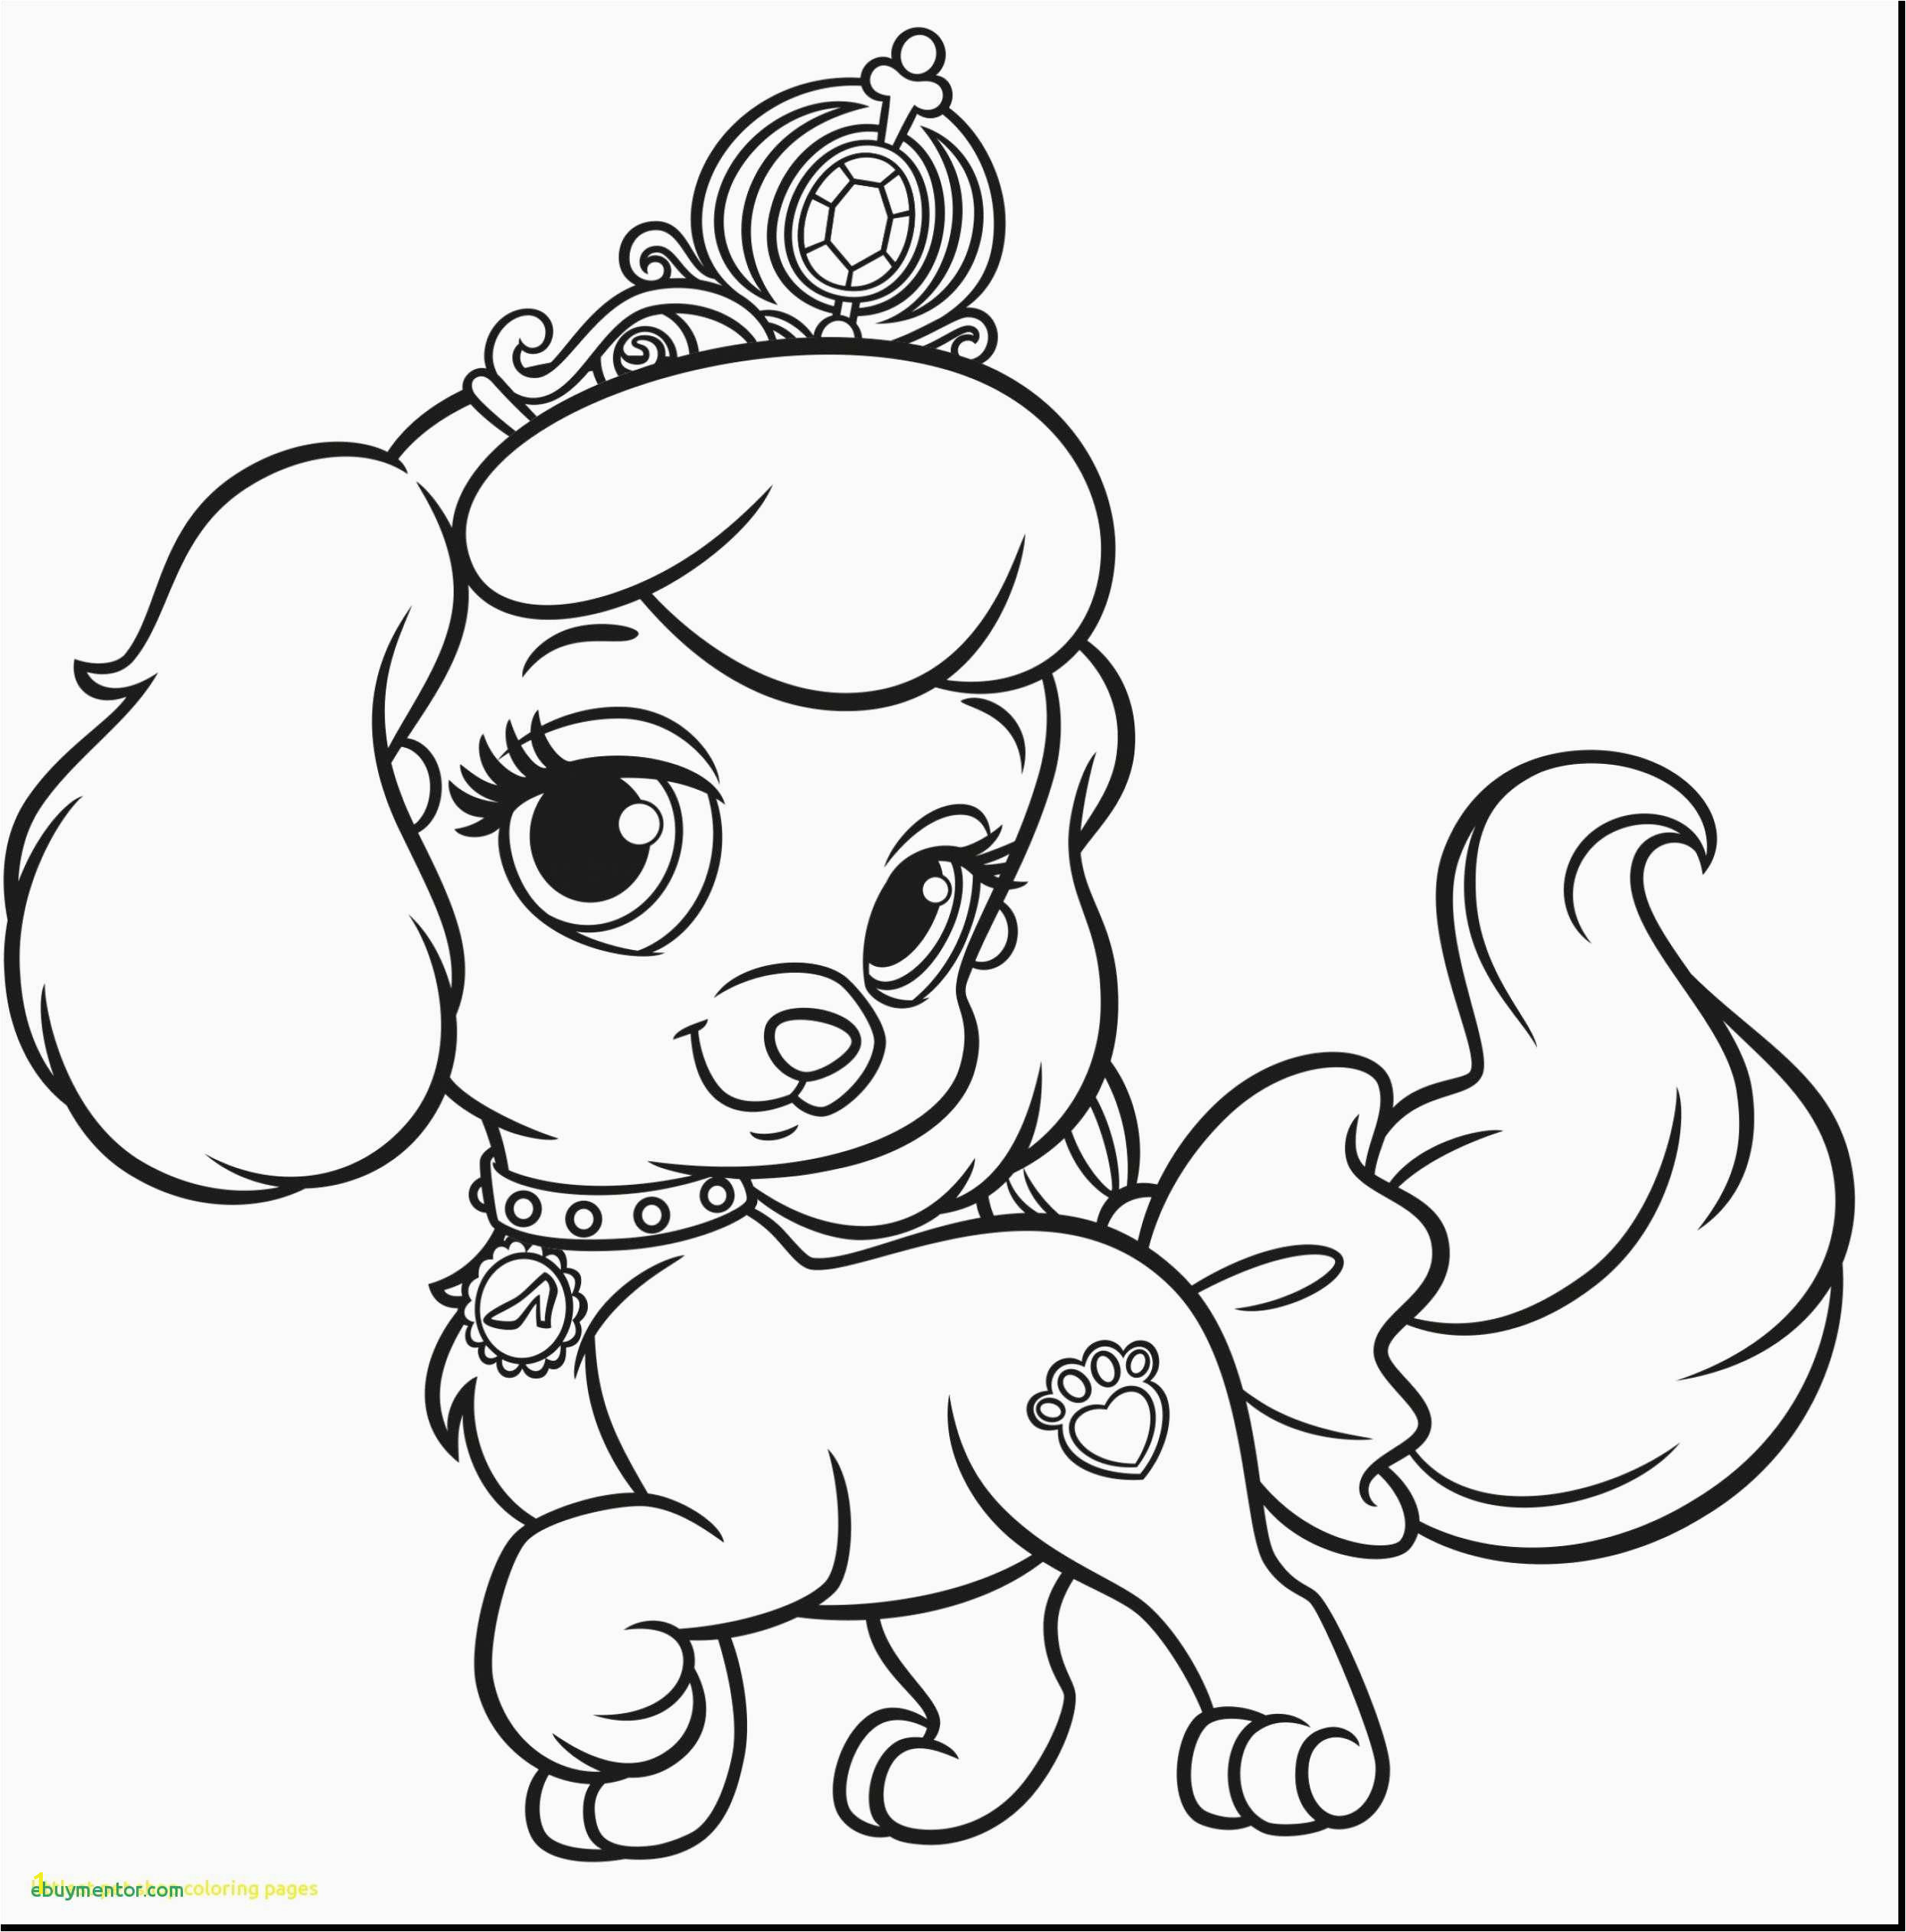 House Pets Coloring Pages Cuties Coloring Pages Gallery thephotosync